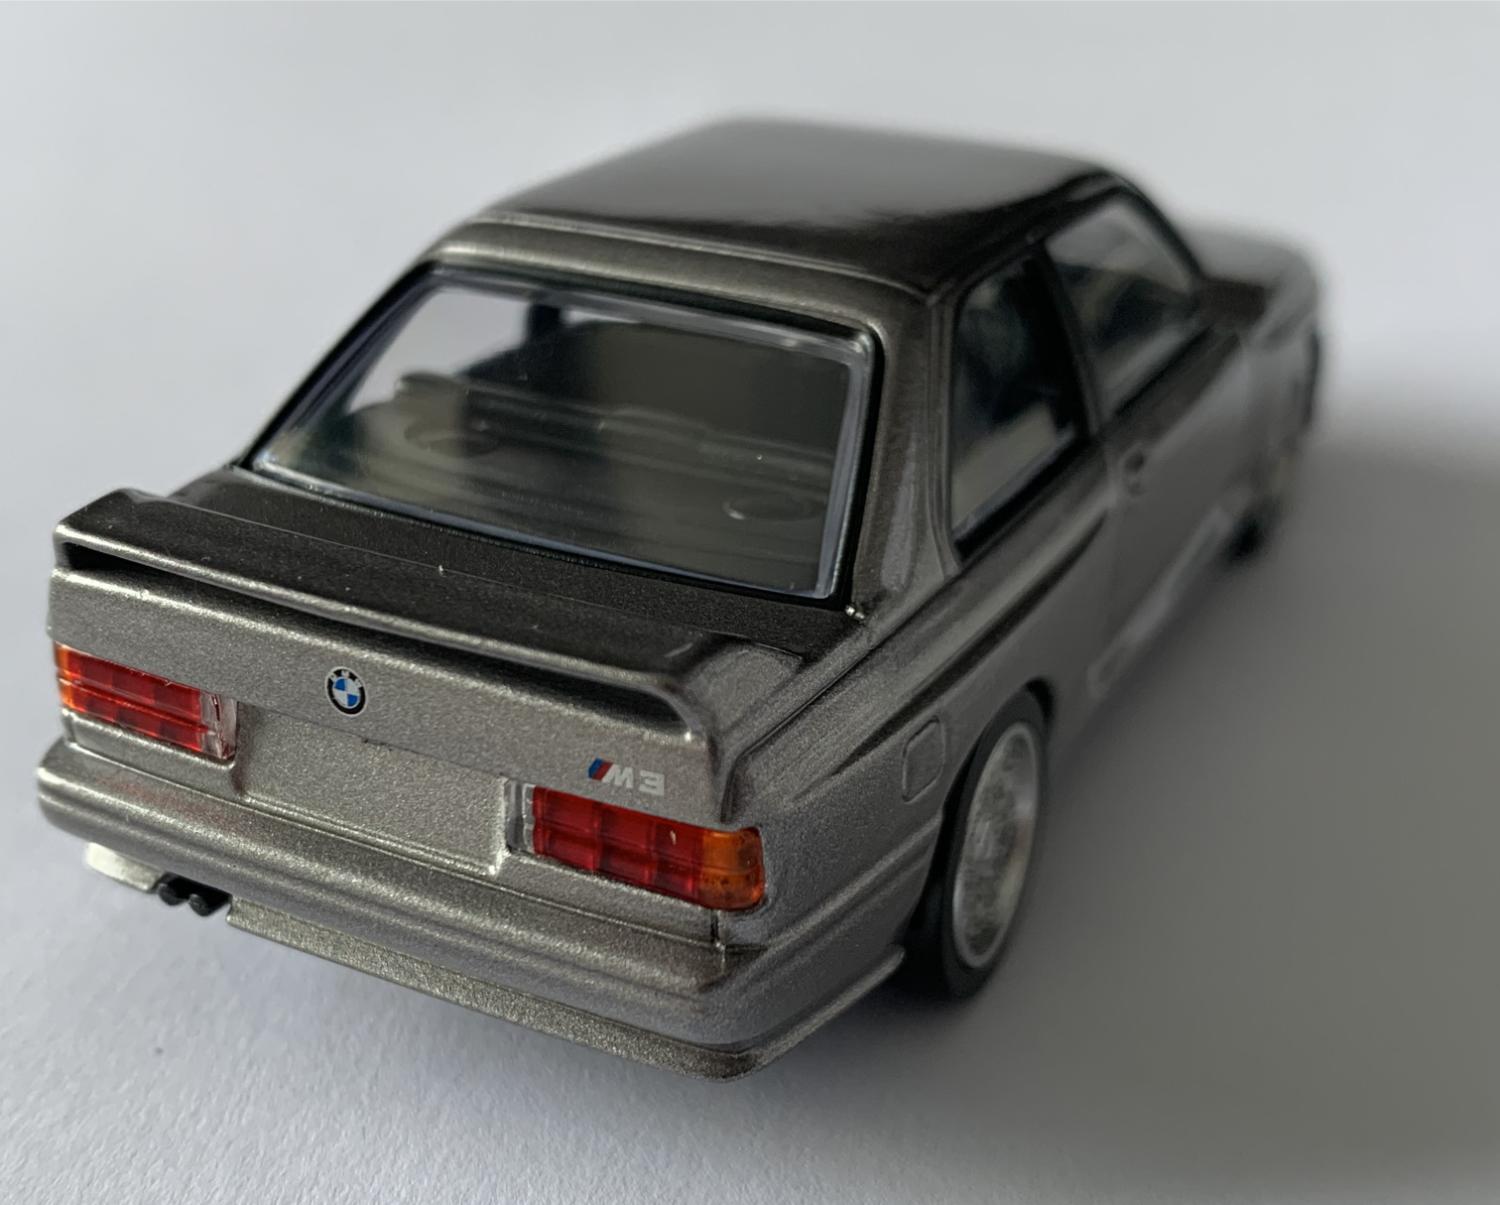 A good replica of the BMW M3 decorated in silver with high rear spoiler and silver wheels.